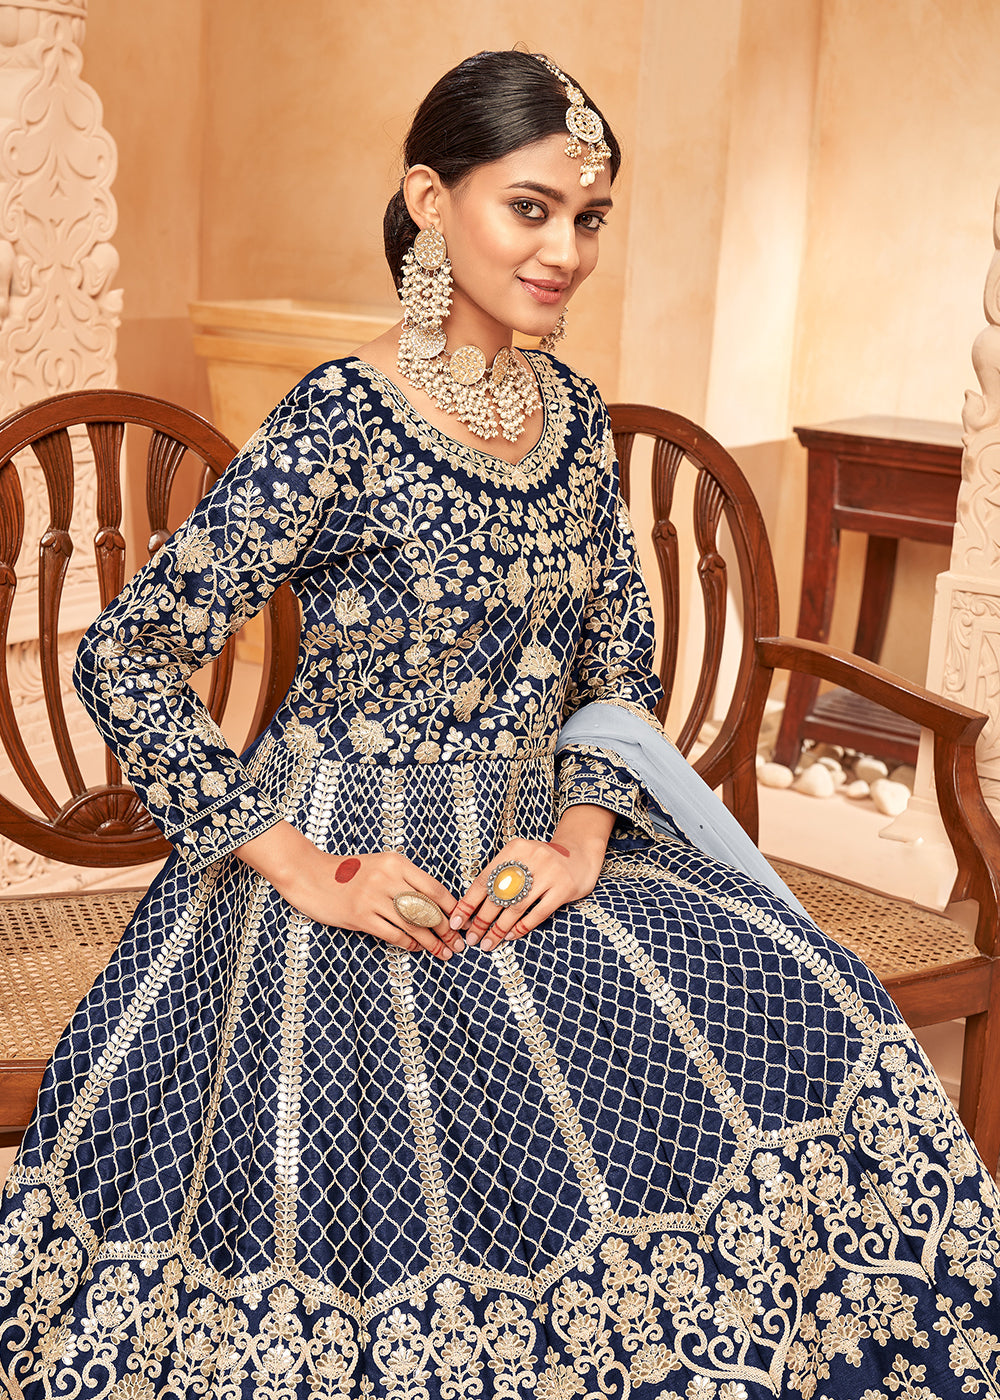 Buy Now Glittering Navy Blue & Gold Embroidered Silk Anarkali Suit Online in USA, UK, Australia, New Zealand, Canada & Worldwide at Empress Clothing. 